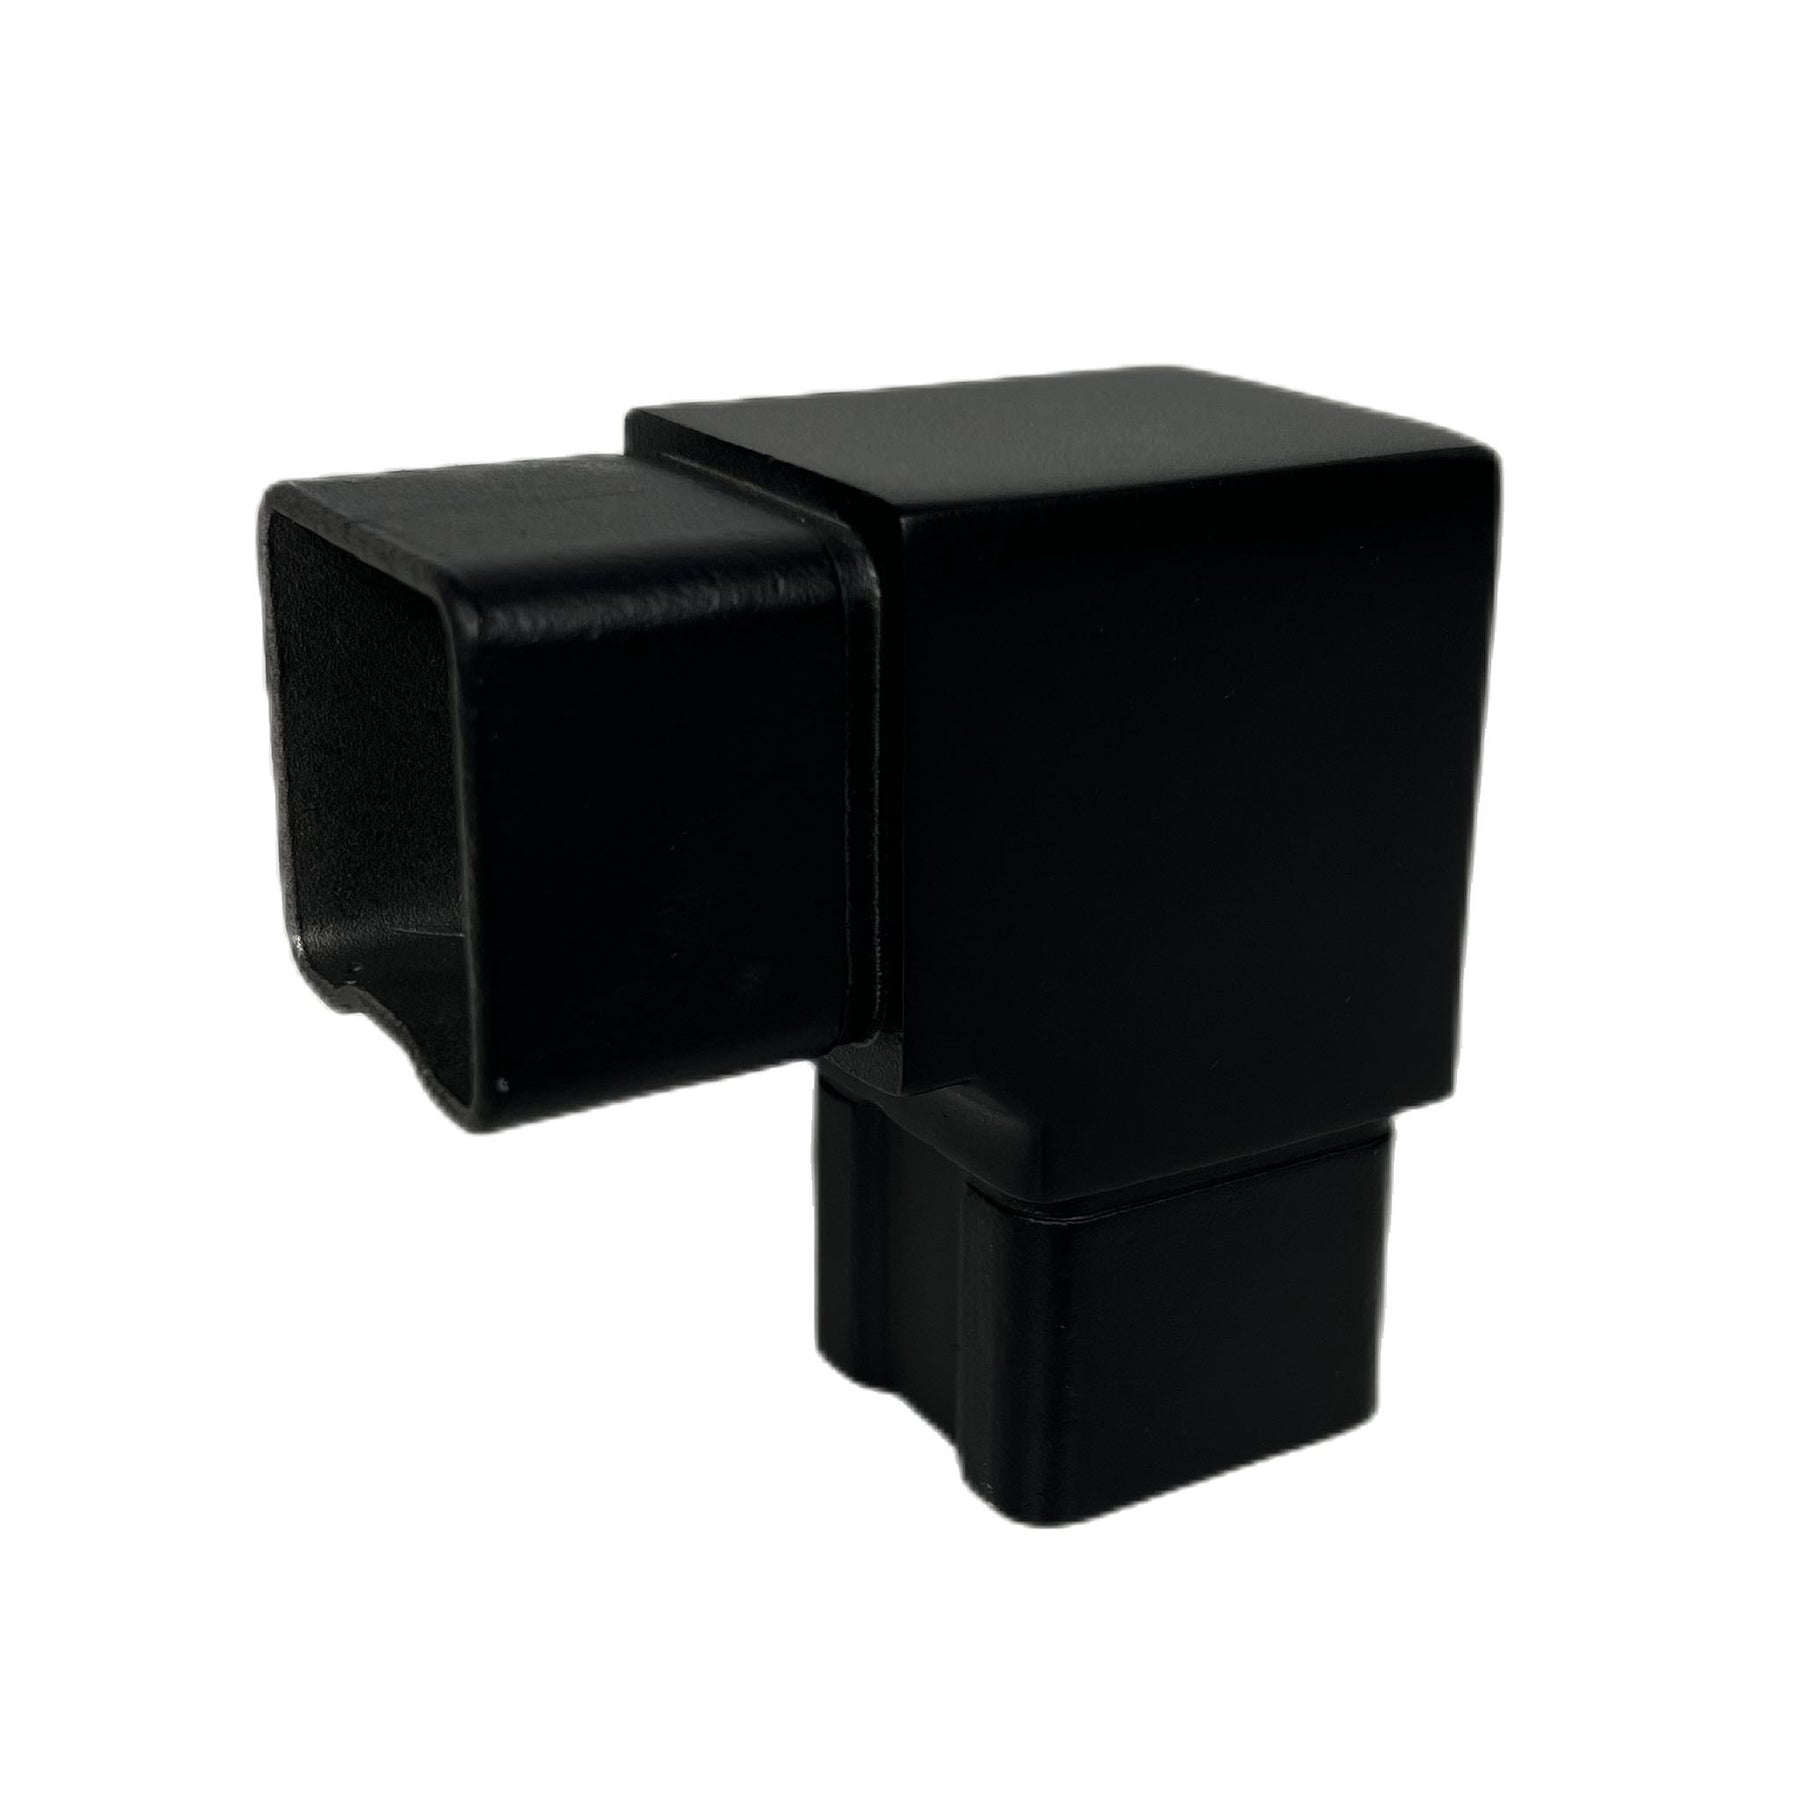 STLX-AC001 90 Degree Angle Connector Square 40x40mm